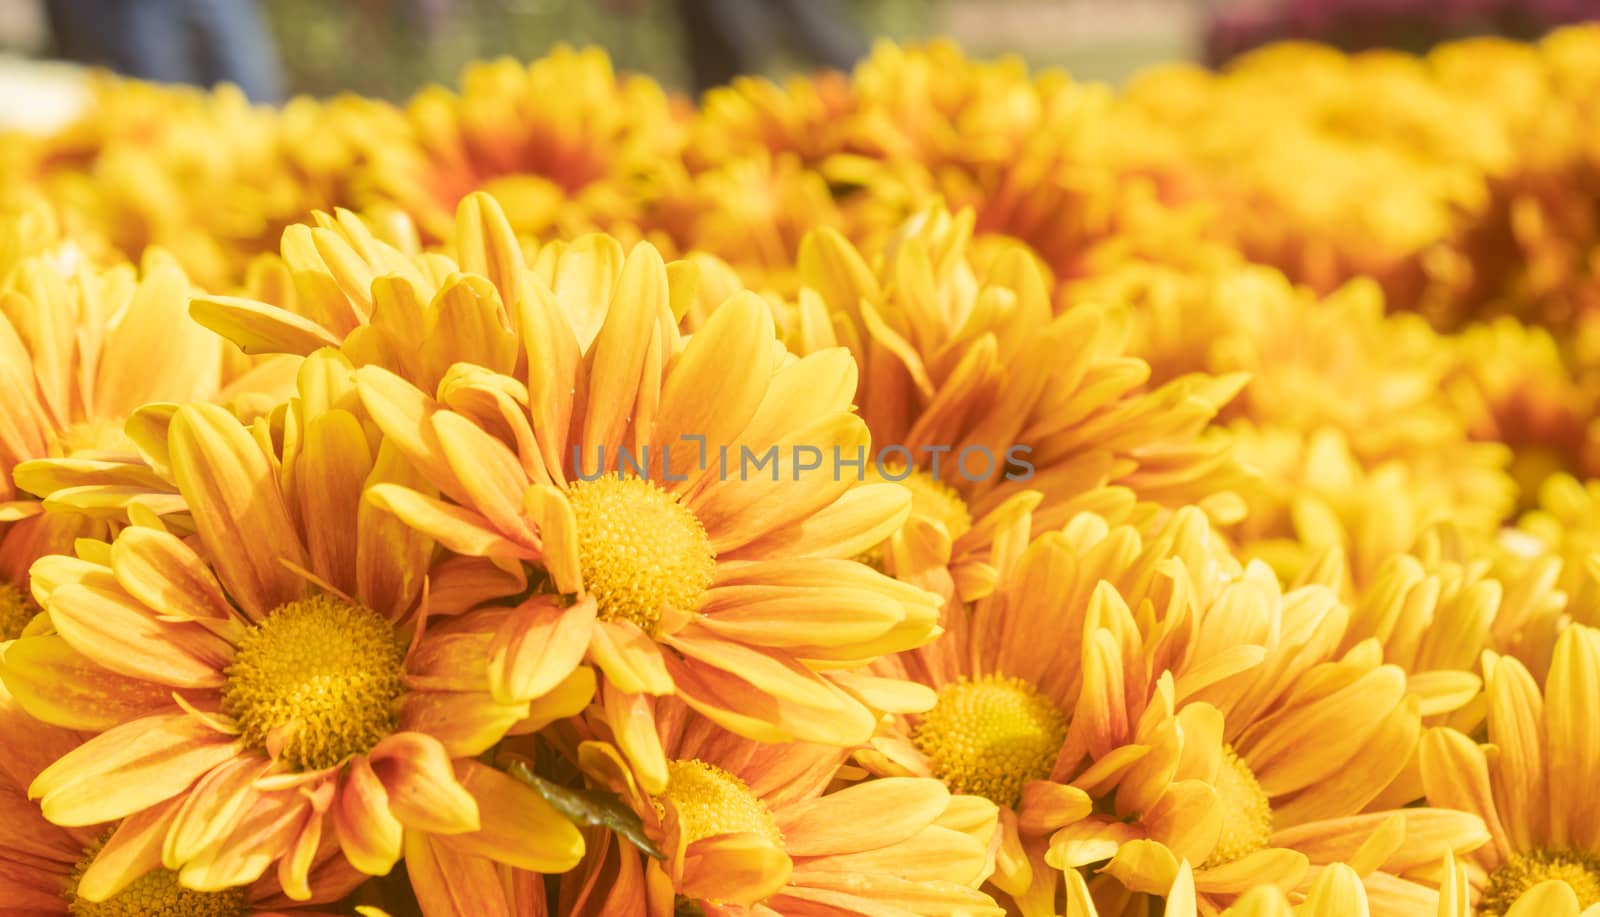 Orange Gerbera Daisy or Gerbera Flower in Garden with Natural Light in Left Frame and Low Angle View